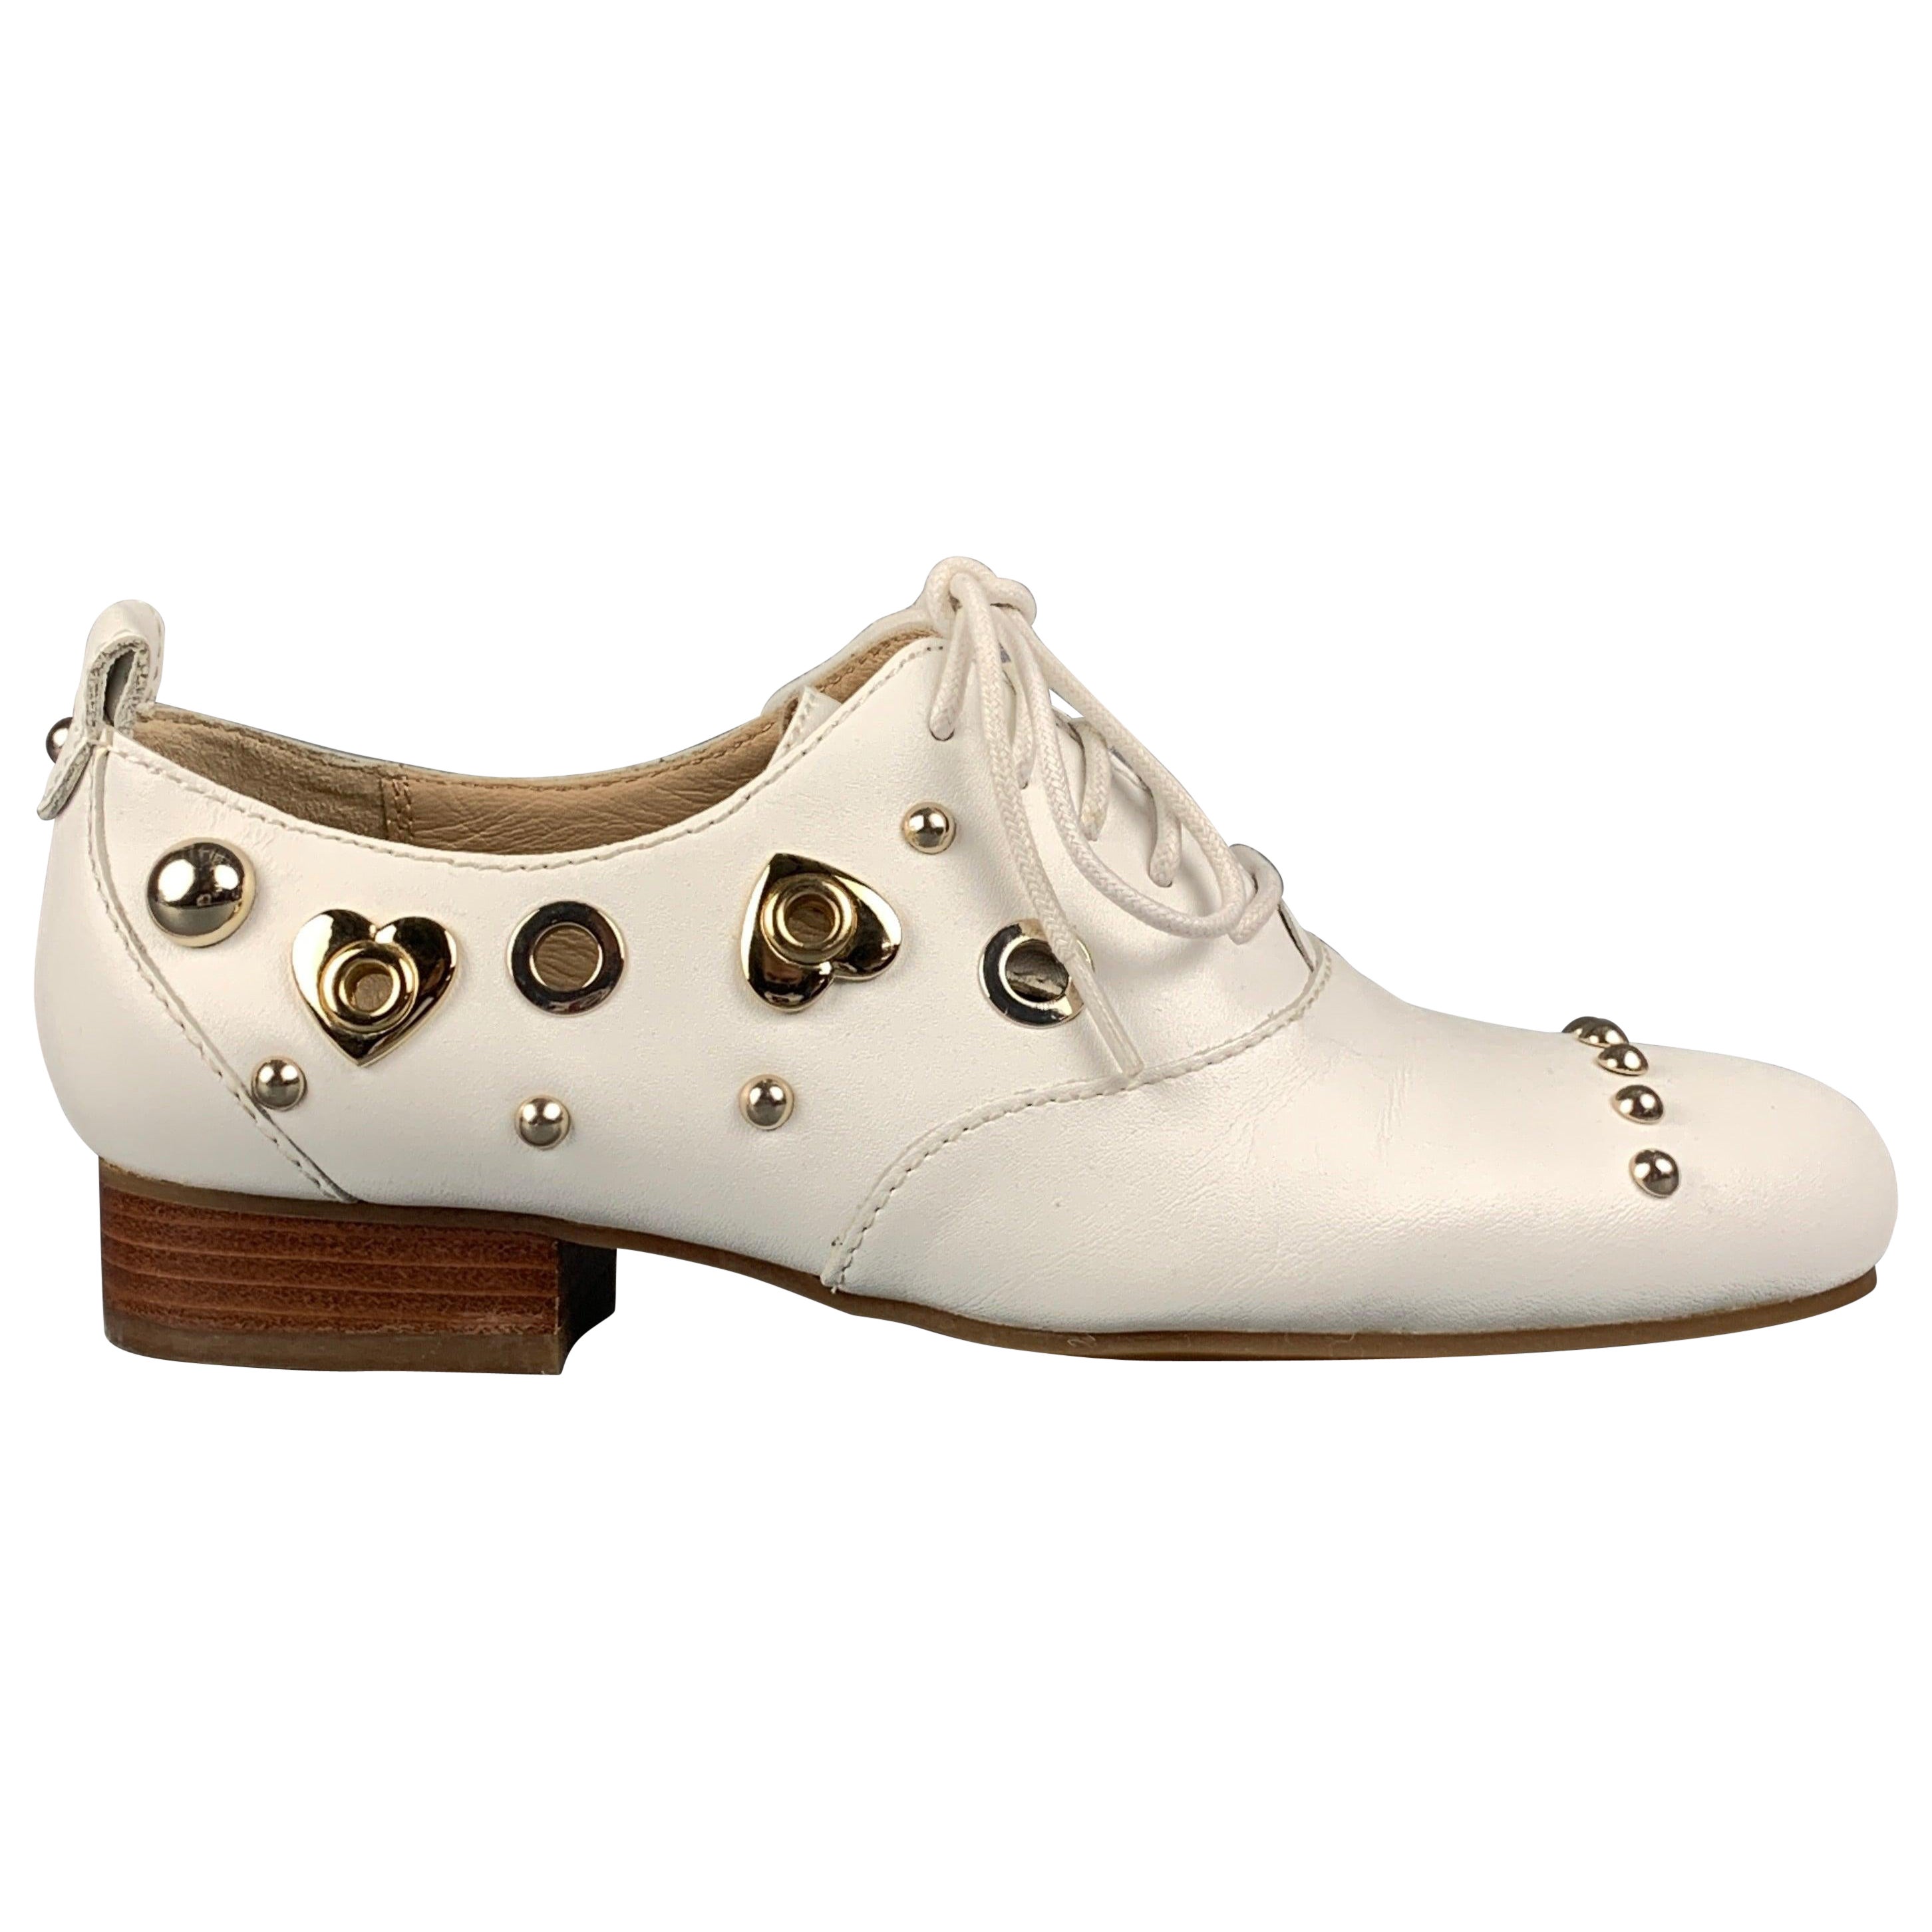 LOVE MOSCHINO Size 5.5 White Leather Studded Flats For Sale